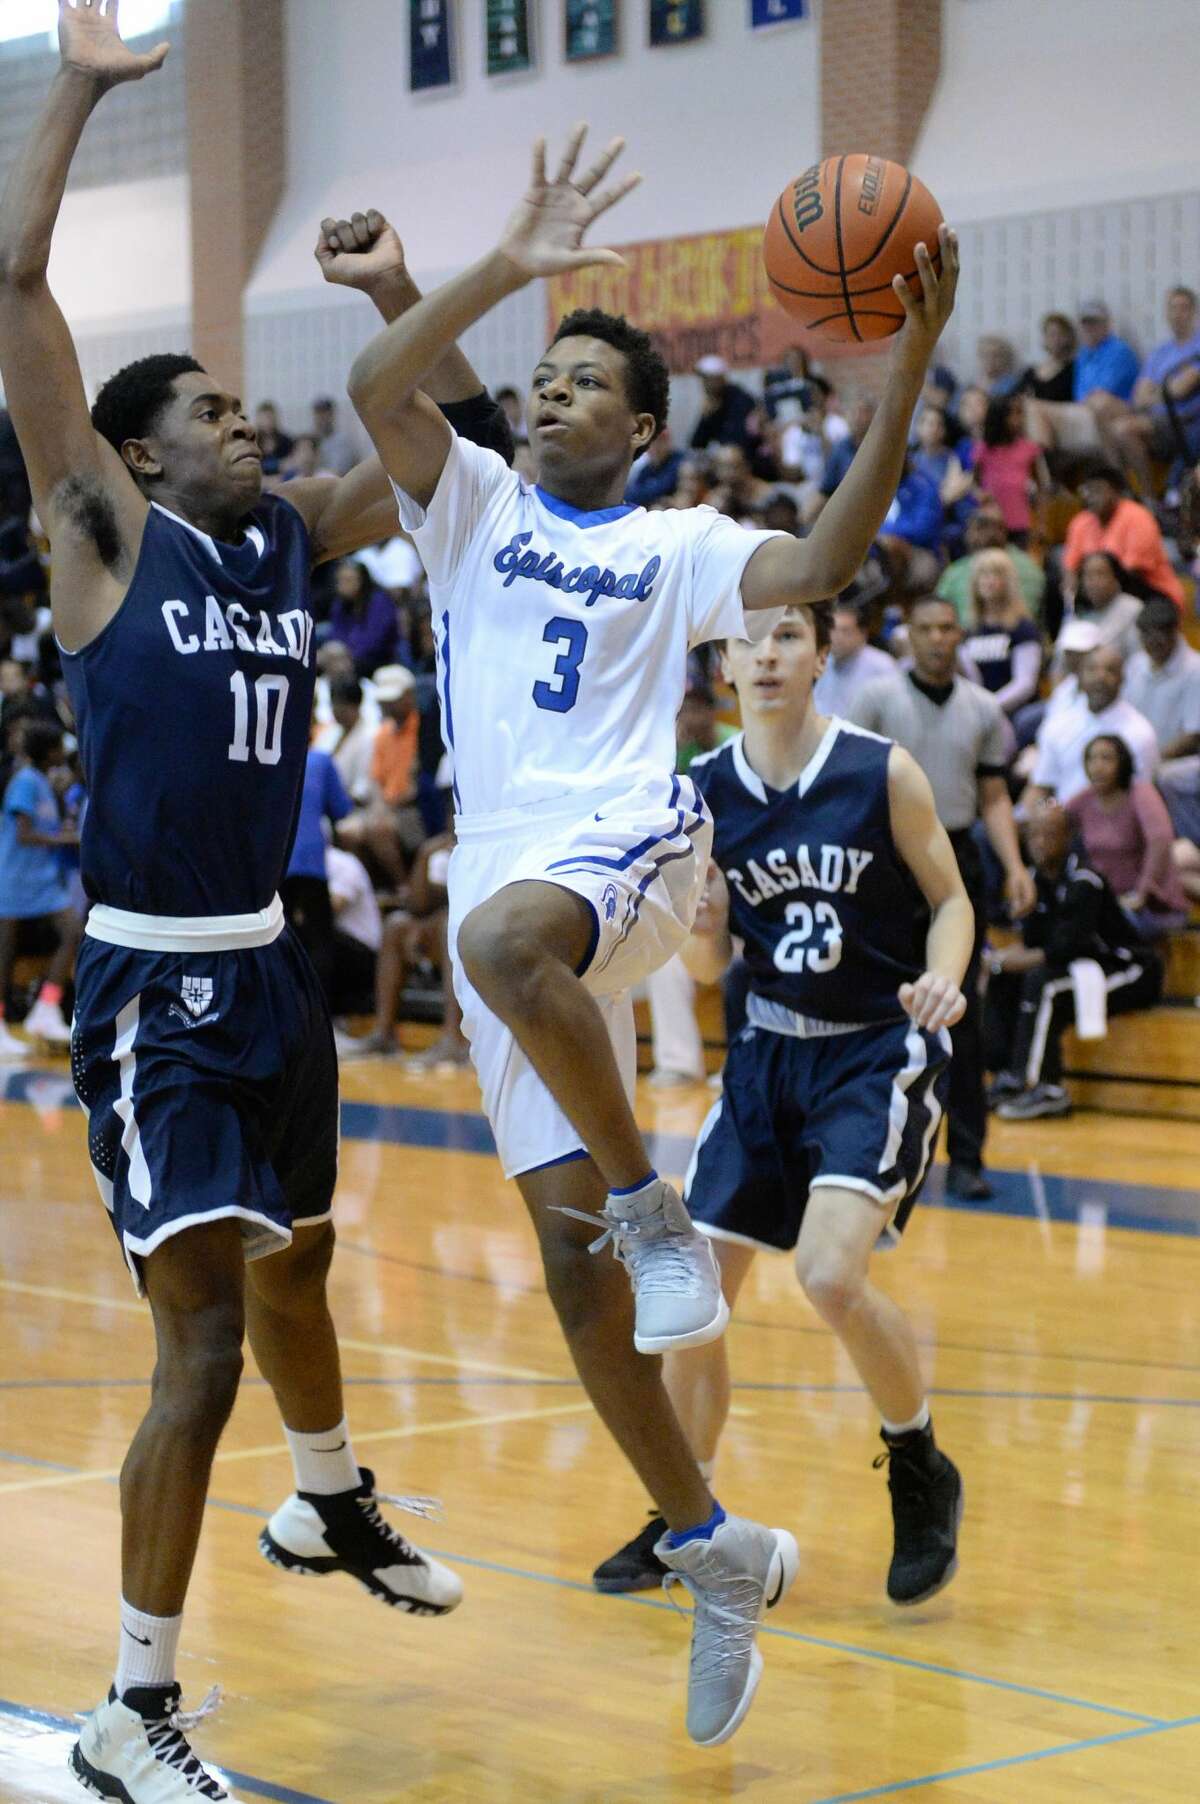 Jahari Long (3) of Episcopal drives to the hoop during the first half of the boys SPC Championship basketball game between the Episcopal Knights and the Oklahoma City Casady Cyclones on Saturday February 11, 2017 at Houston Christian High School, Houston, TX.